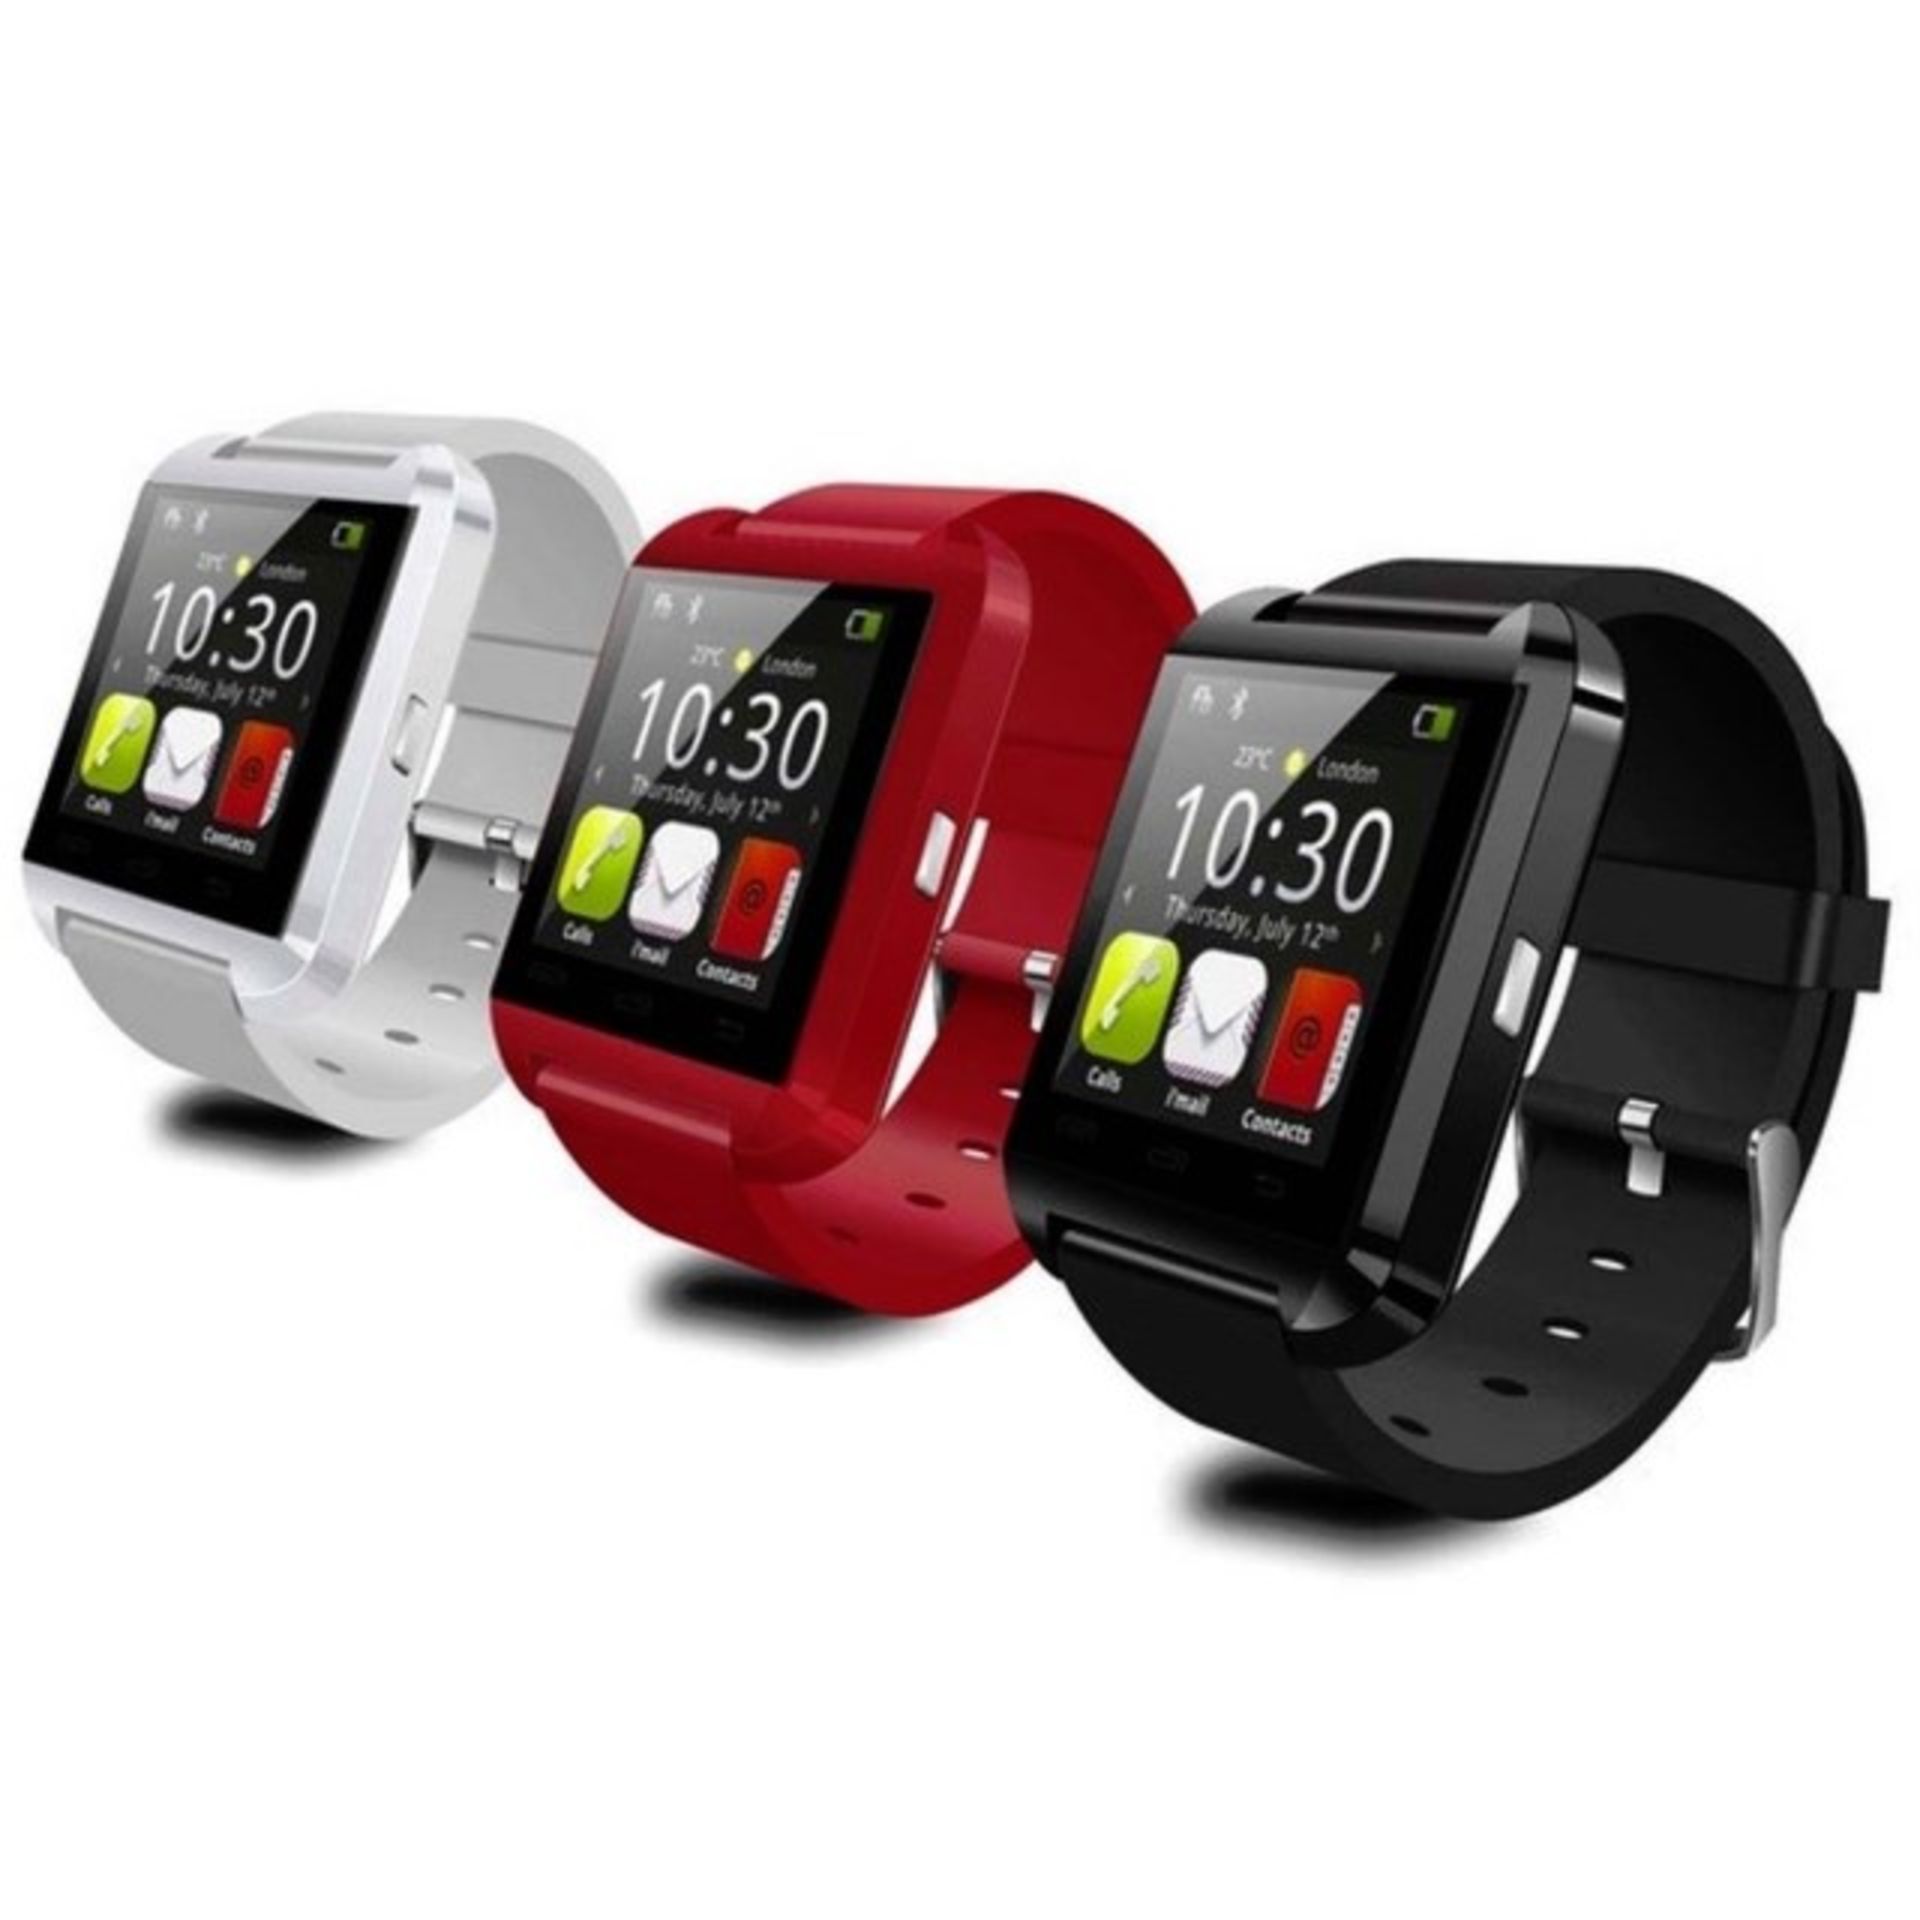 *TRADE QTY* Brand New Boxed Bluetooth Smart Watch With Touchscreen - Can Talk/Recieve Phone Calls